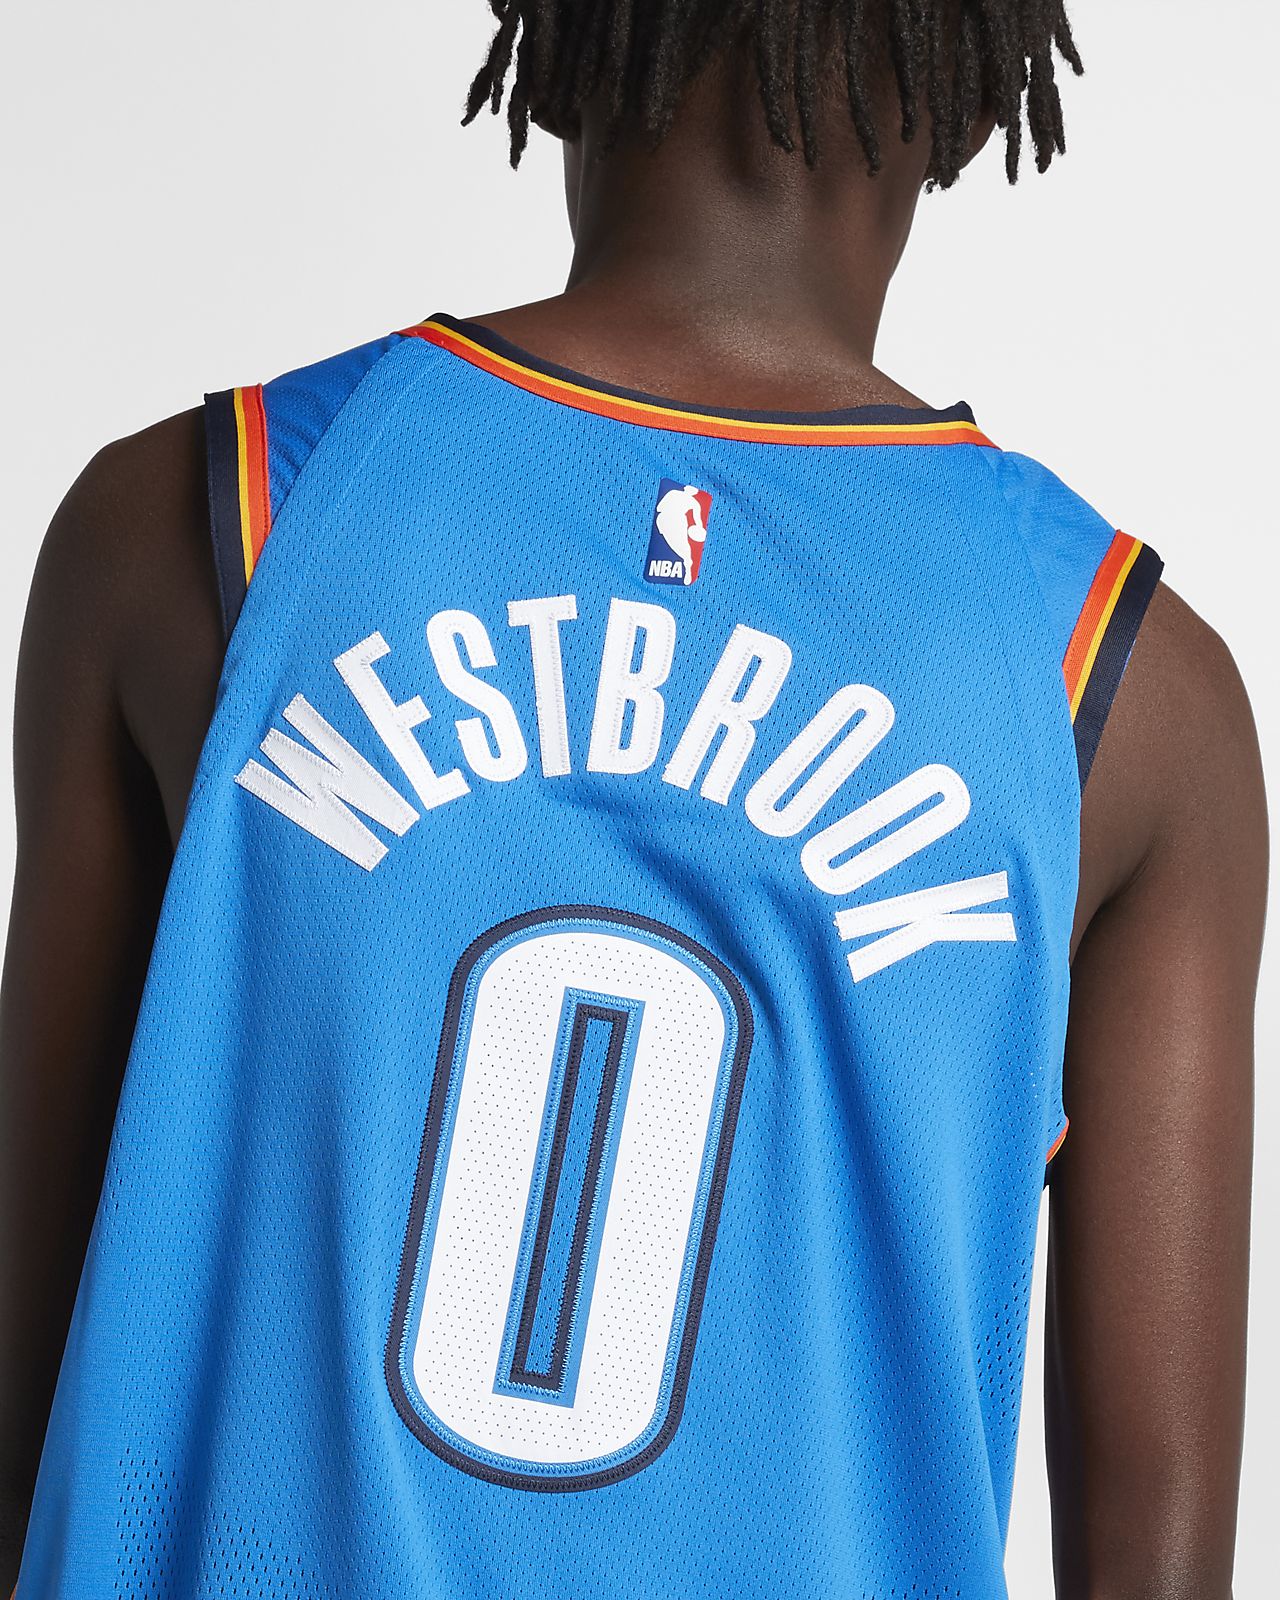 russell westbrook thunder jersey